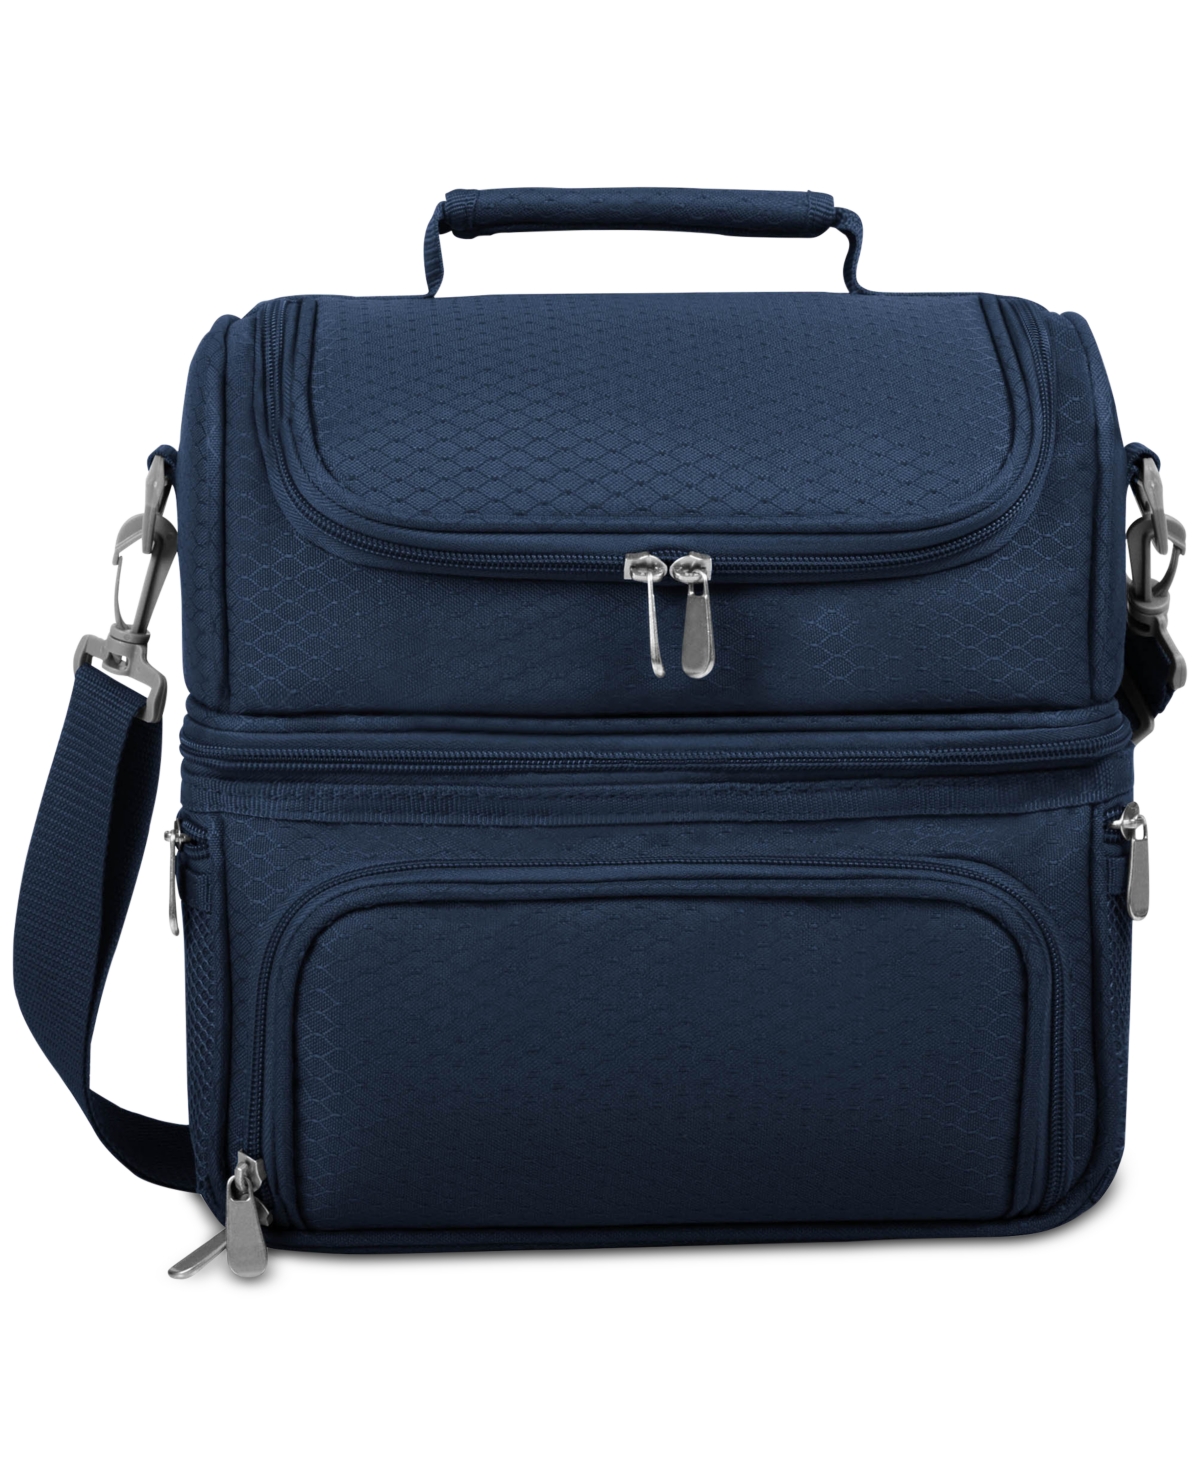 by Picnic Time Pranzo Lunch Tote - Navy